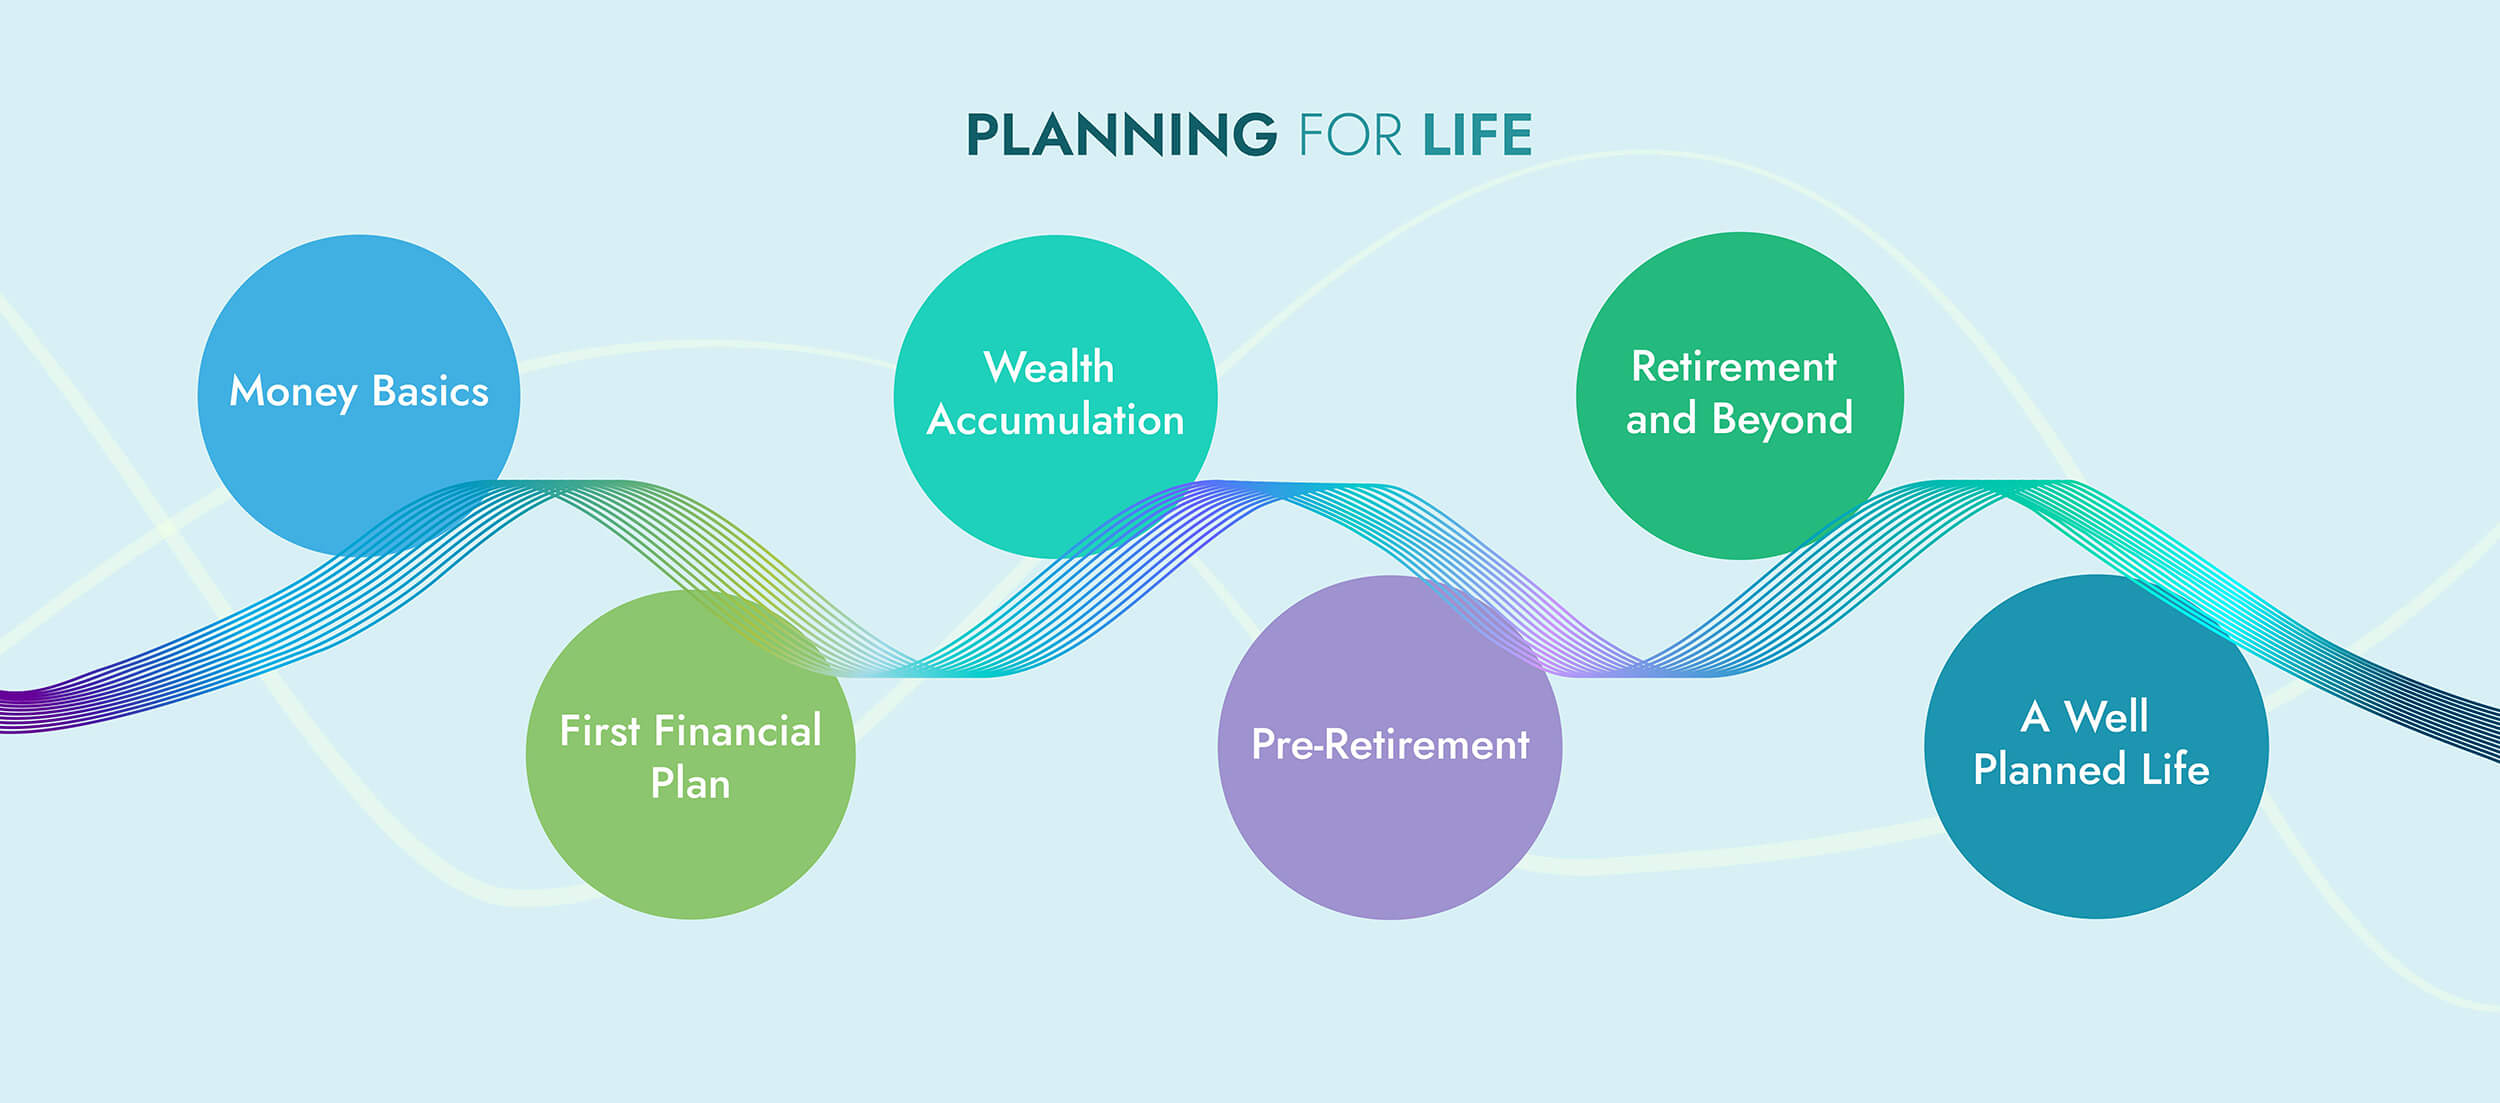 Karen Lee and Associates Planning for Life Graphic, depicting the services KLA offers — Money Basics, Wealth Accumulation, First Financial Plan, Pre-Retirement, Retirement and Beyond, and A Well-Planned Life.